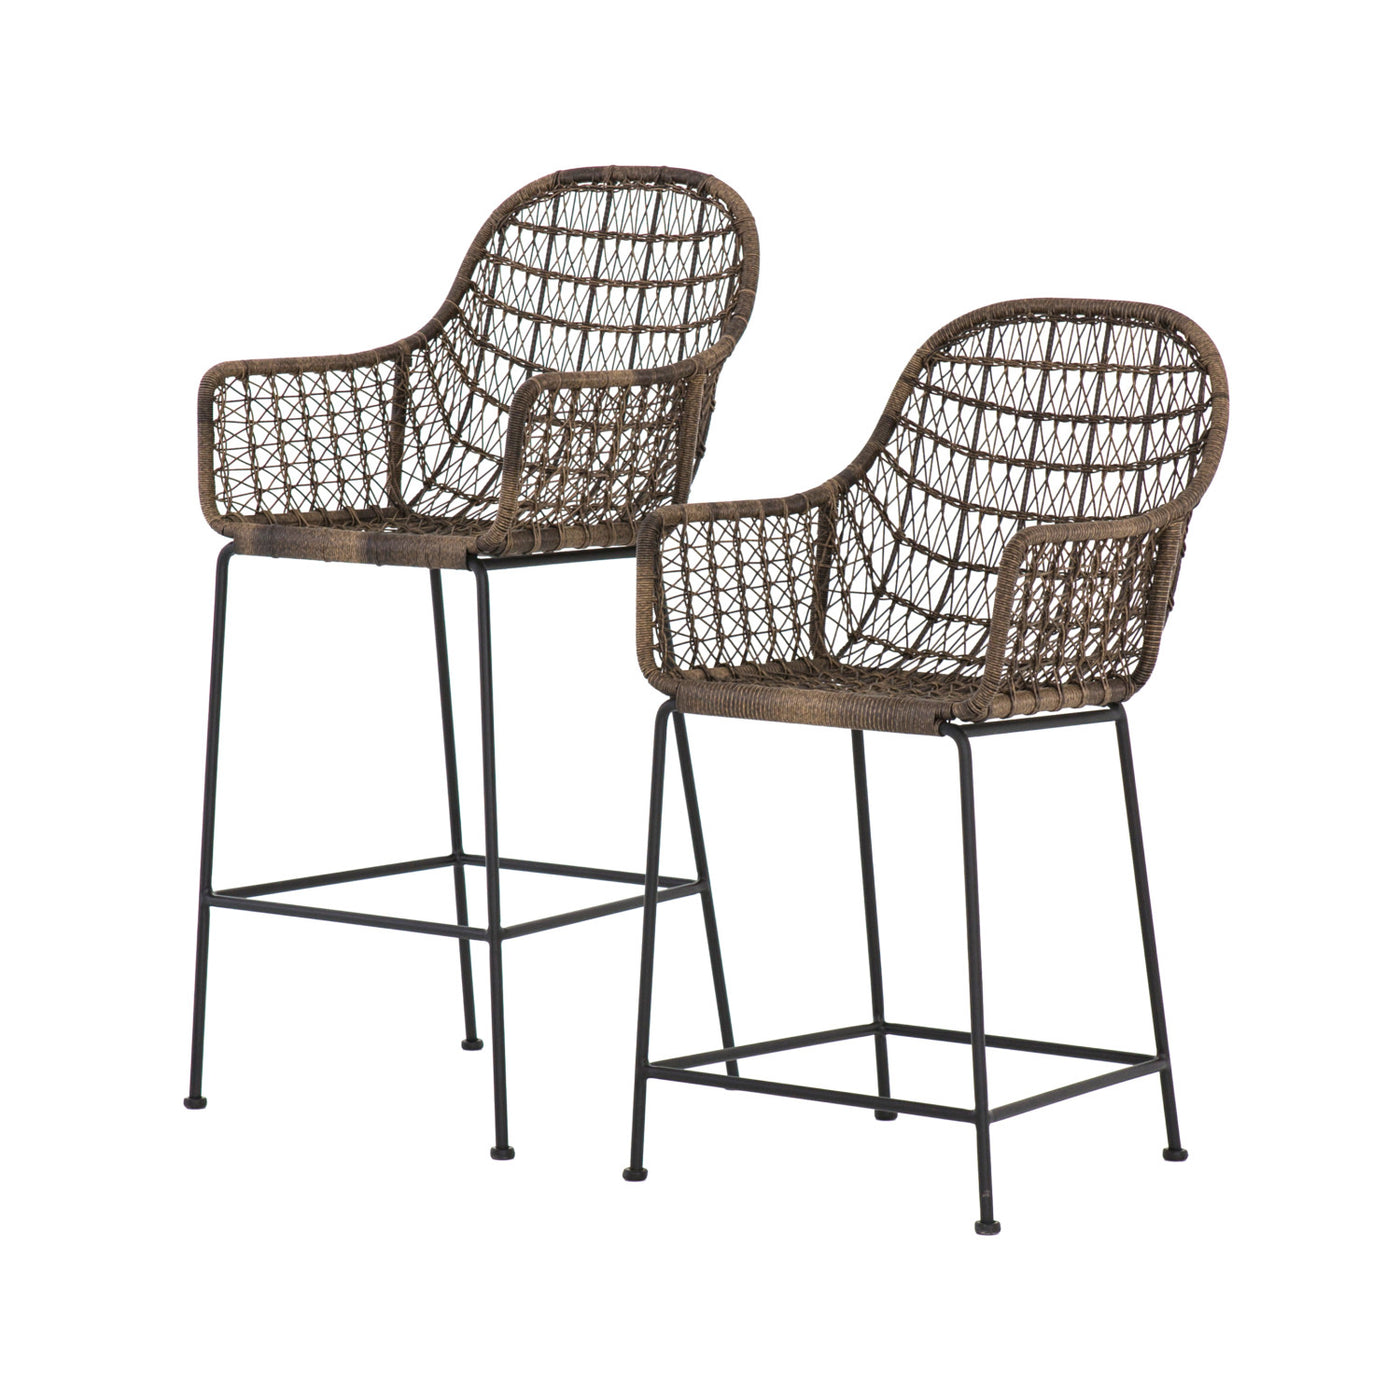 All Weather Wicker Stools